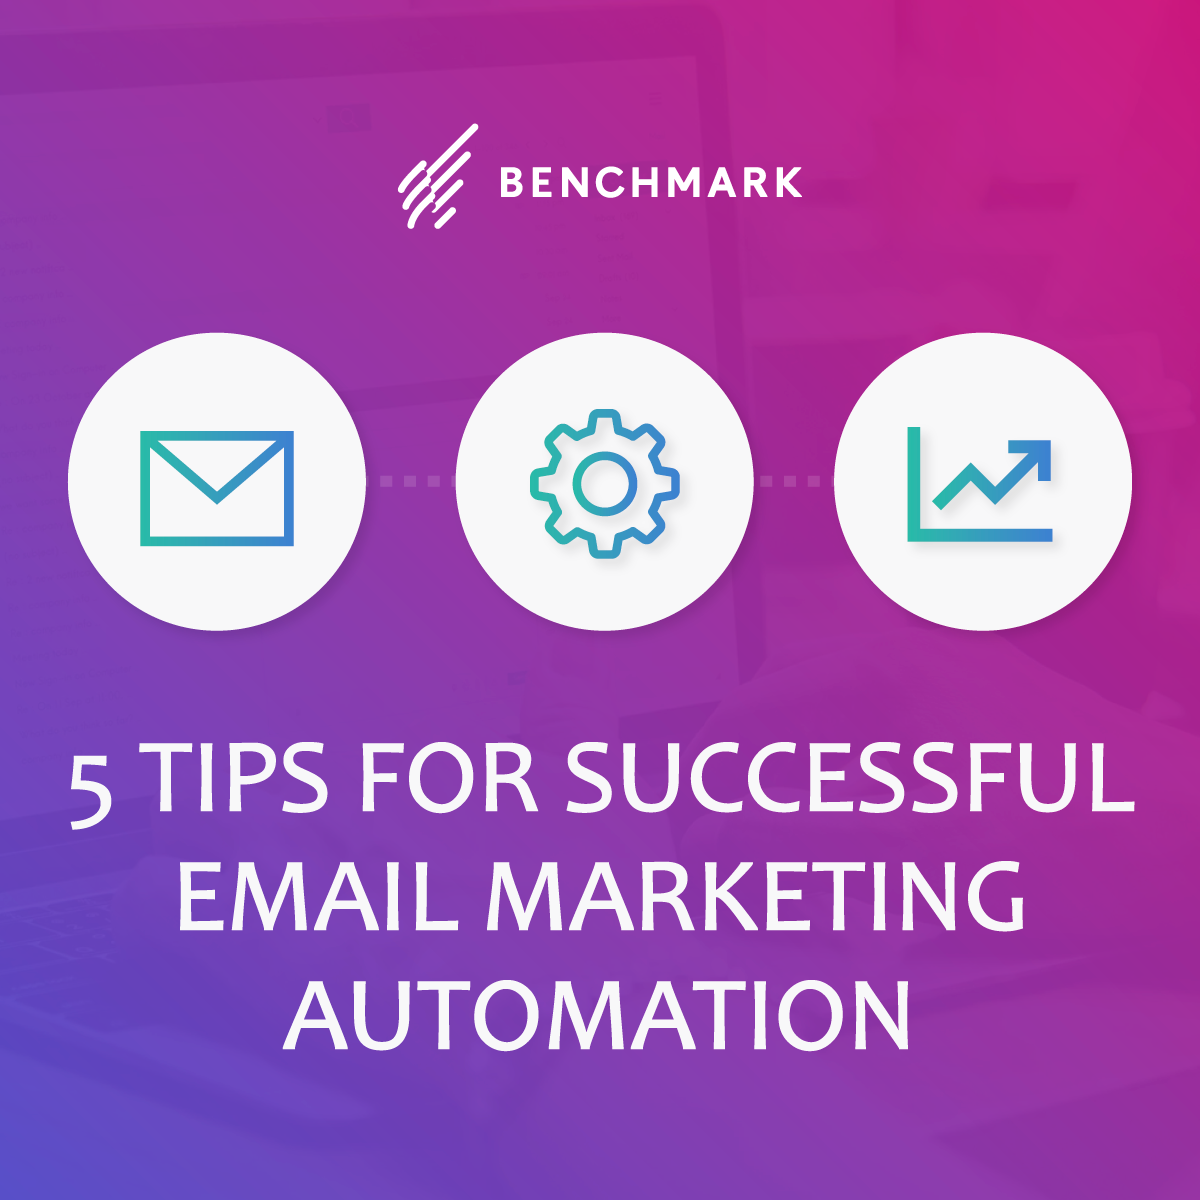 5 Tips for Successful Email Marketing Automation